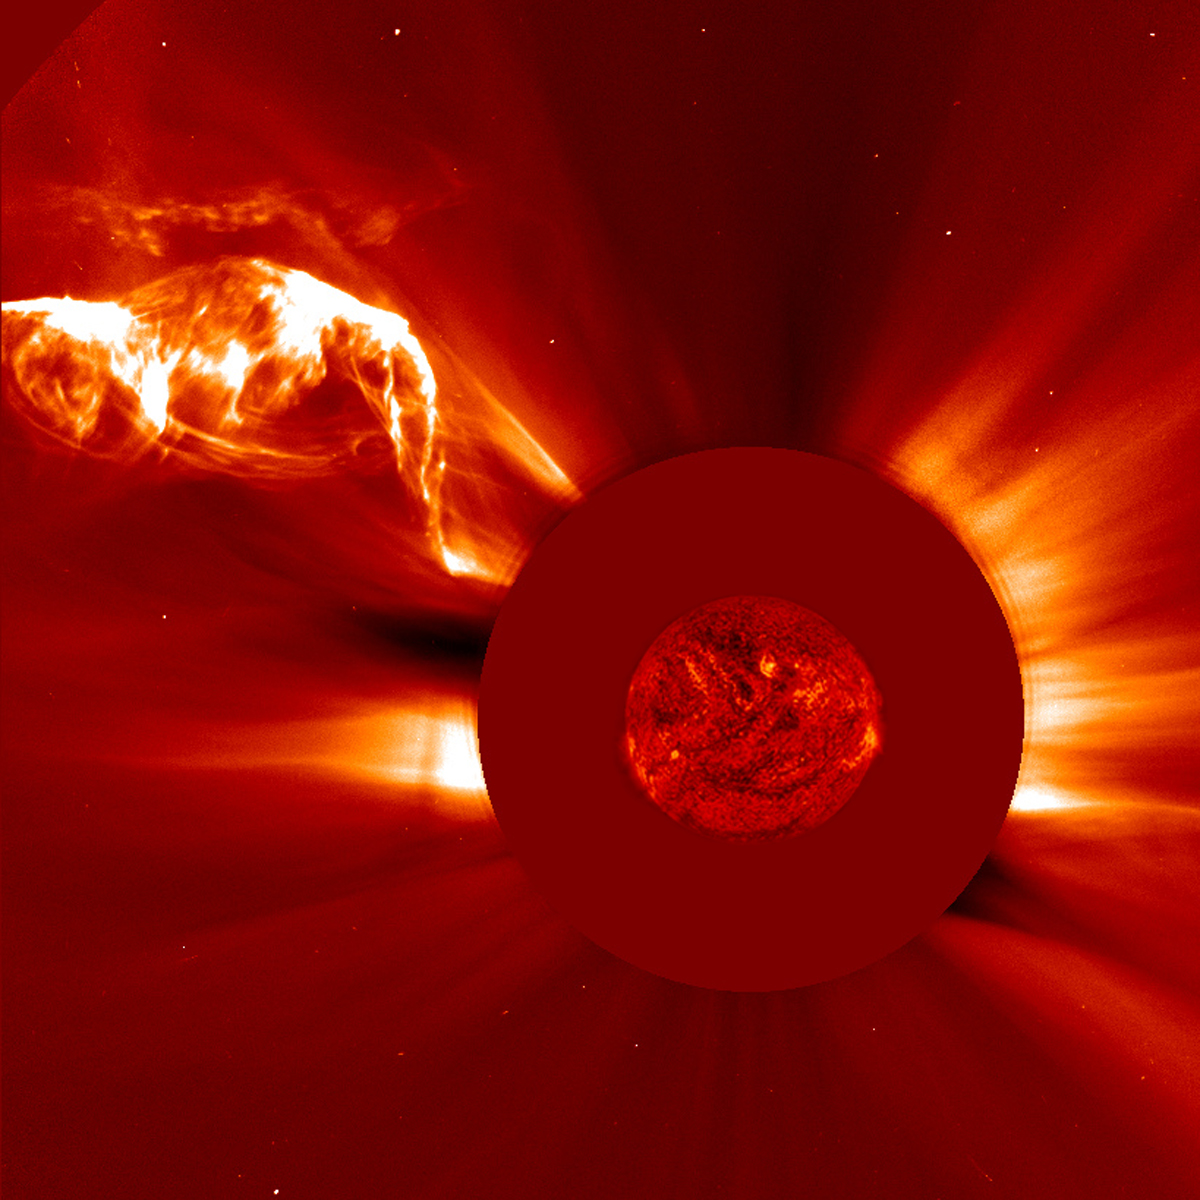 SOHO view of a CME April 28-29,2015